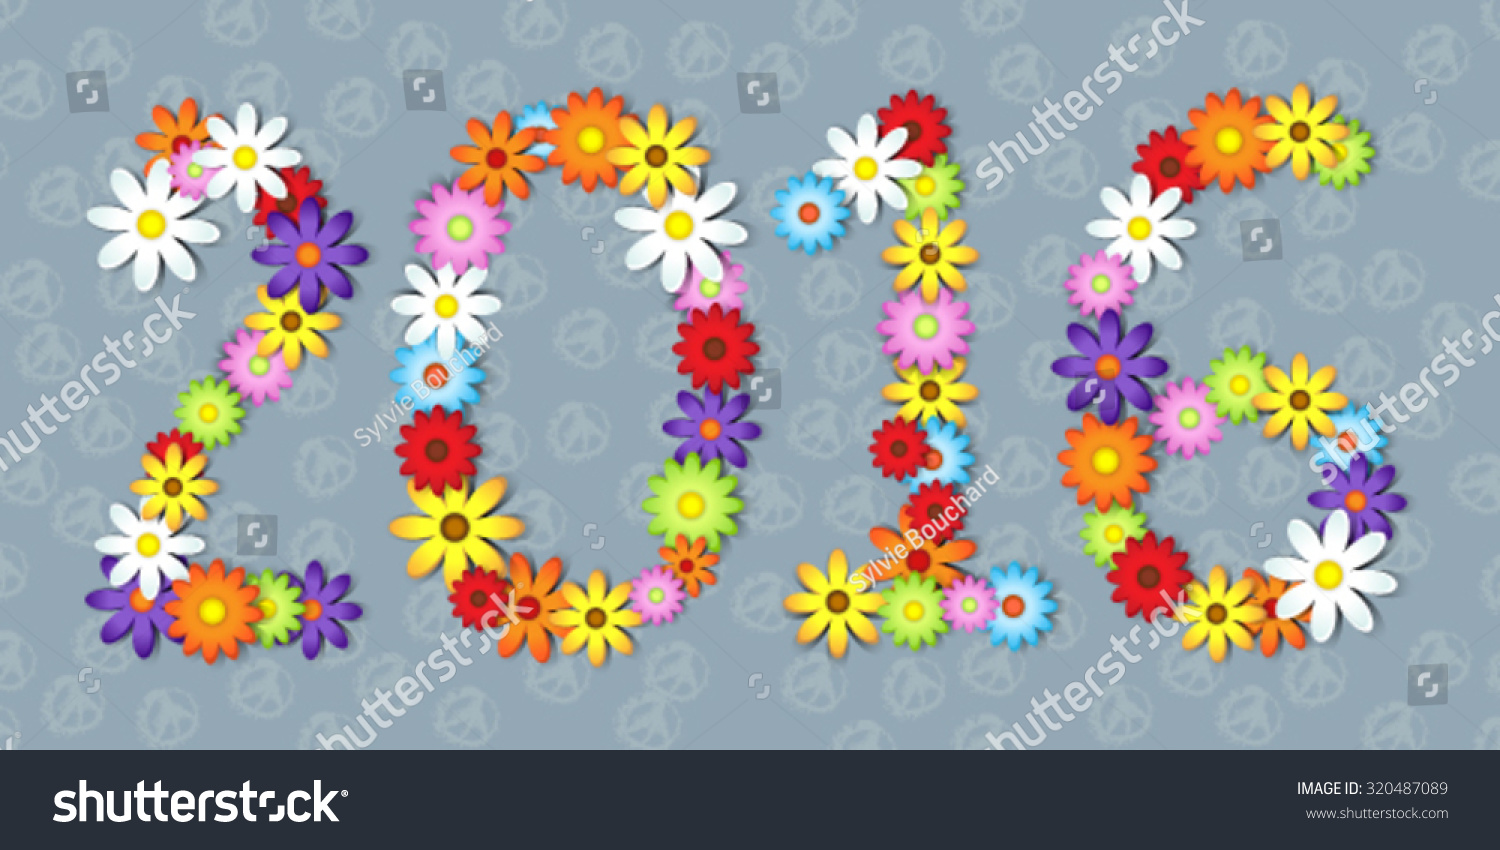 2016 In Colorful Flowers Over Peace Symbol Background Stock Vector